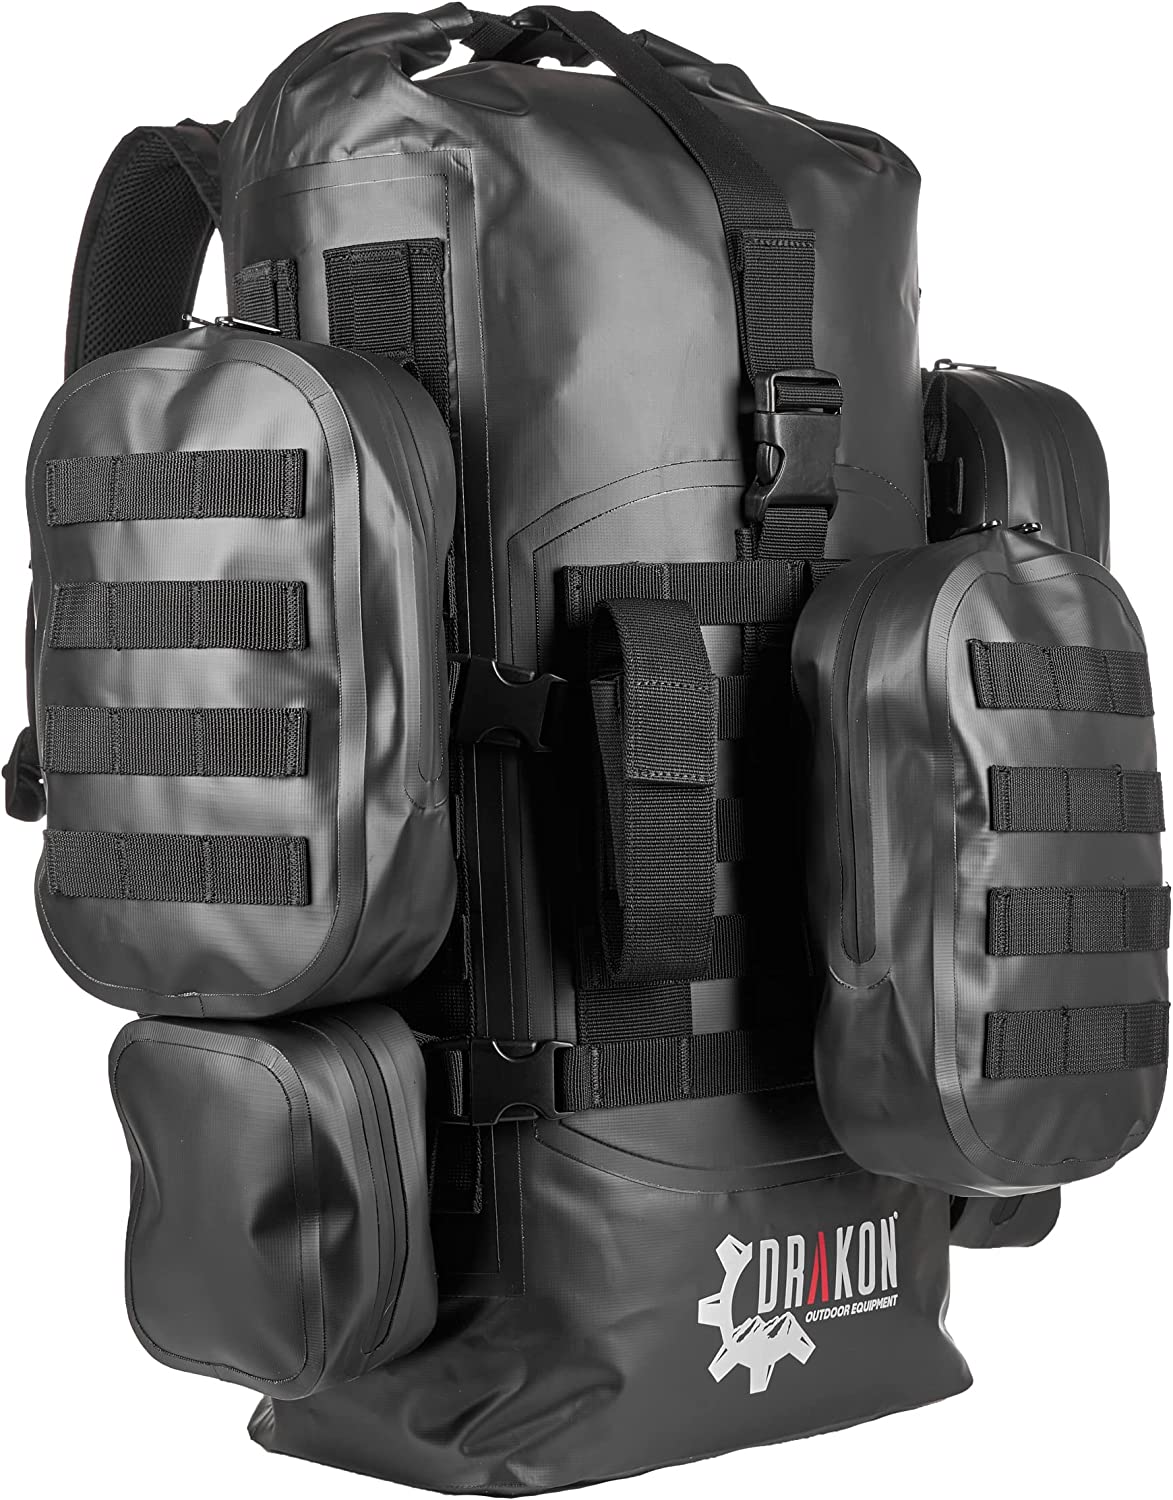 Drakon Outdoors 40L Waterproof Dry Bag Survival Backpack – Roll Top Go-Bag Perfect for Boating, Camping, Hunting, Kayaking – Black Padded Adjustable Straps With MOLLE System